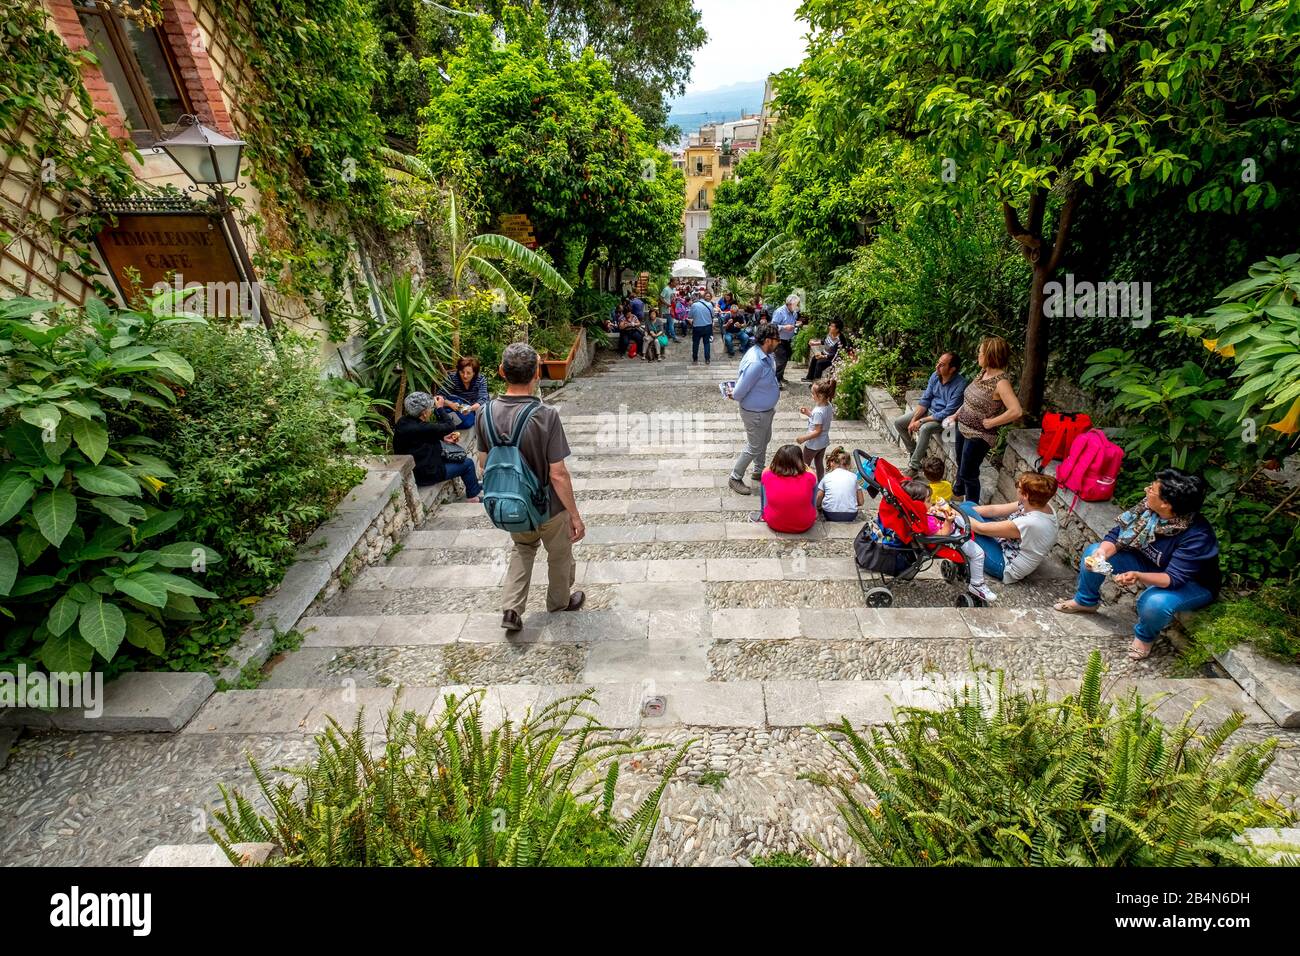 Tourists picnicking and taking a break on a staircase in Taormina, southern Italy, Europe, Sicily, Italy Stock Photo